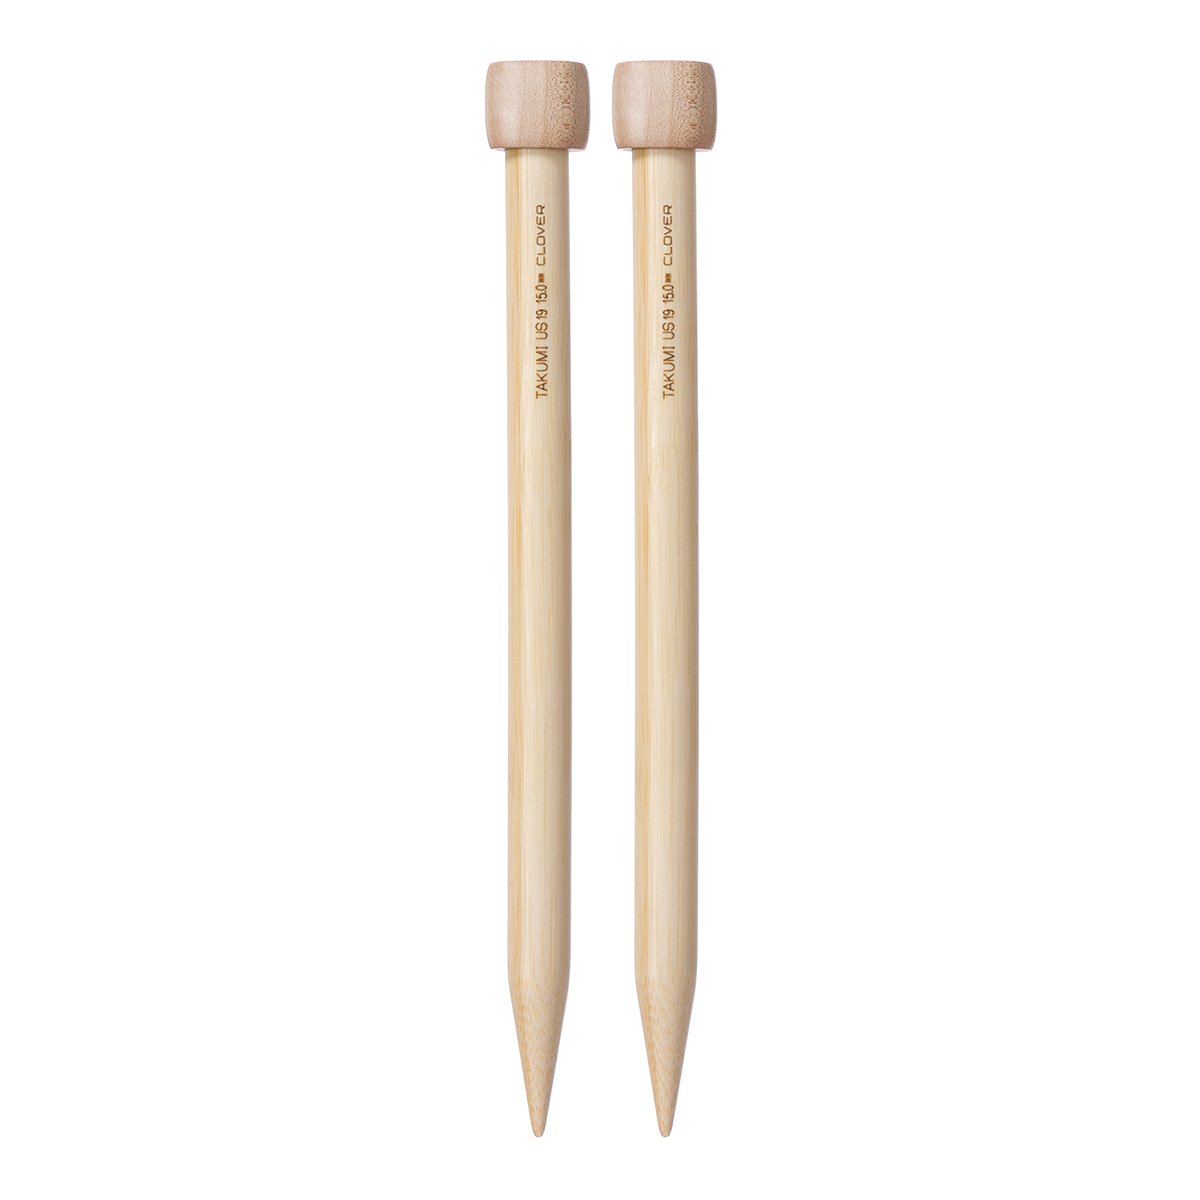 Clover 9” Bamboo Size 7 Single Point Knitting Needle Set by Clover